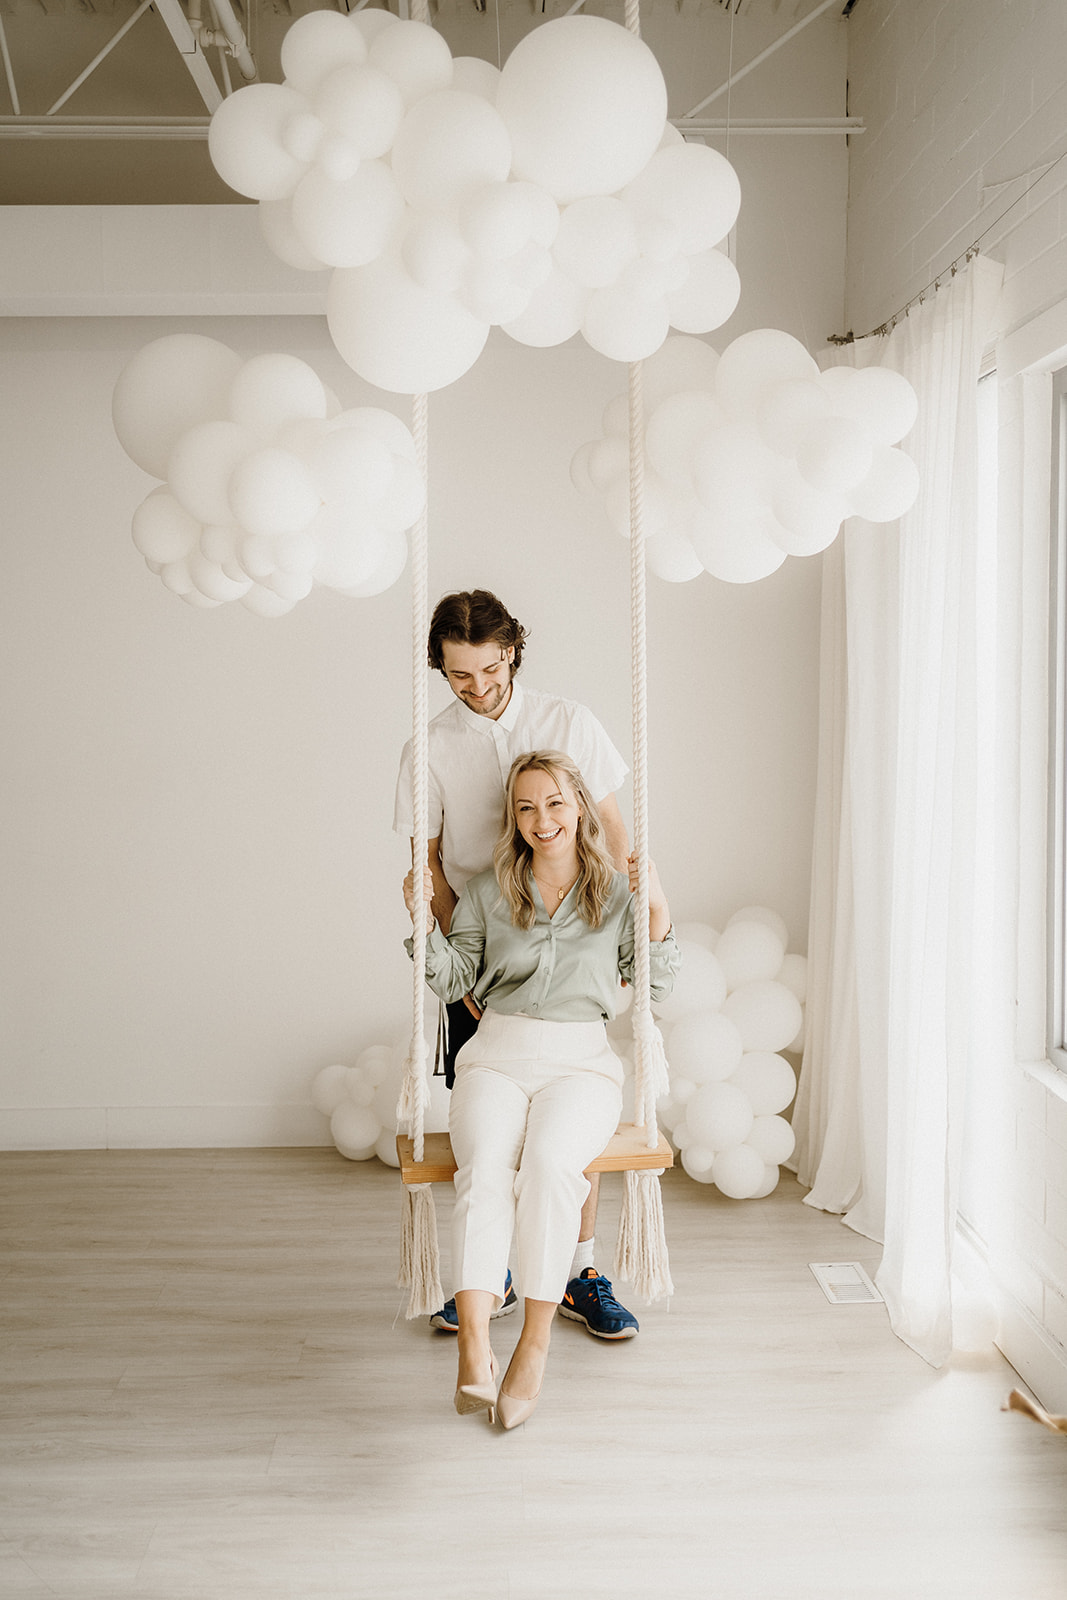 Lady sitting on a swing with a man behind her.